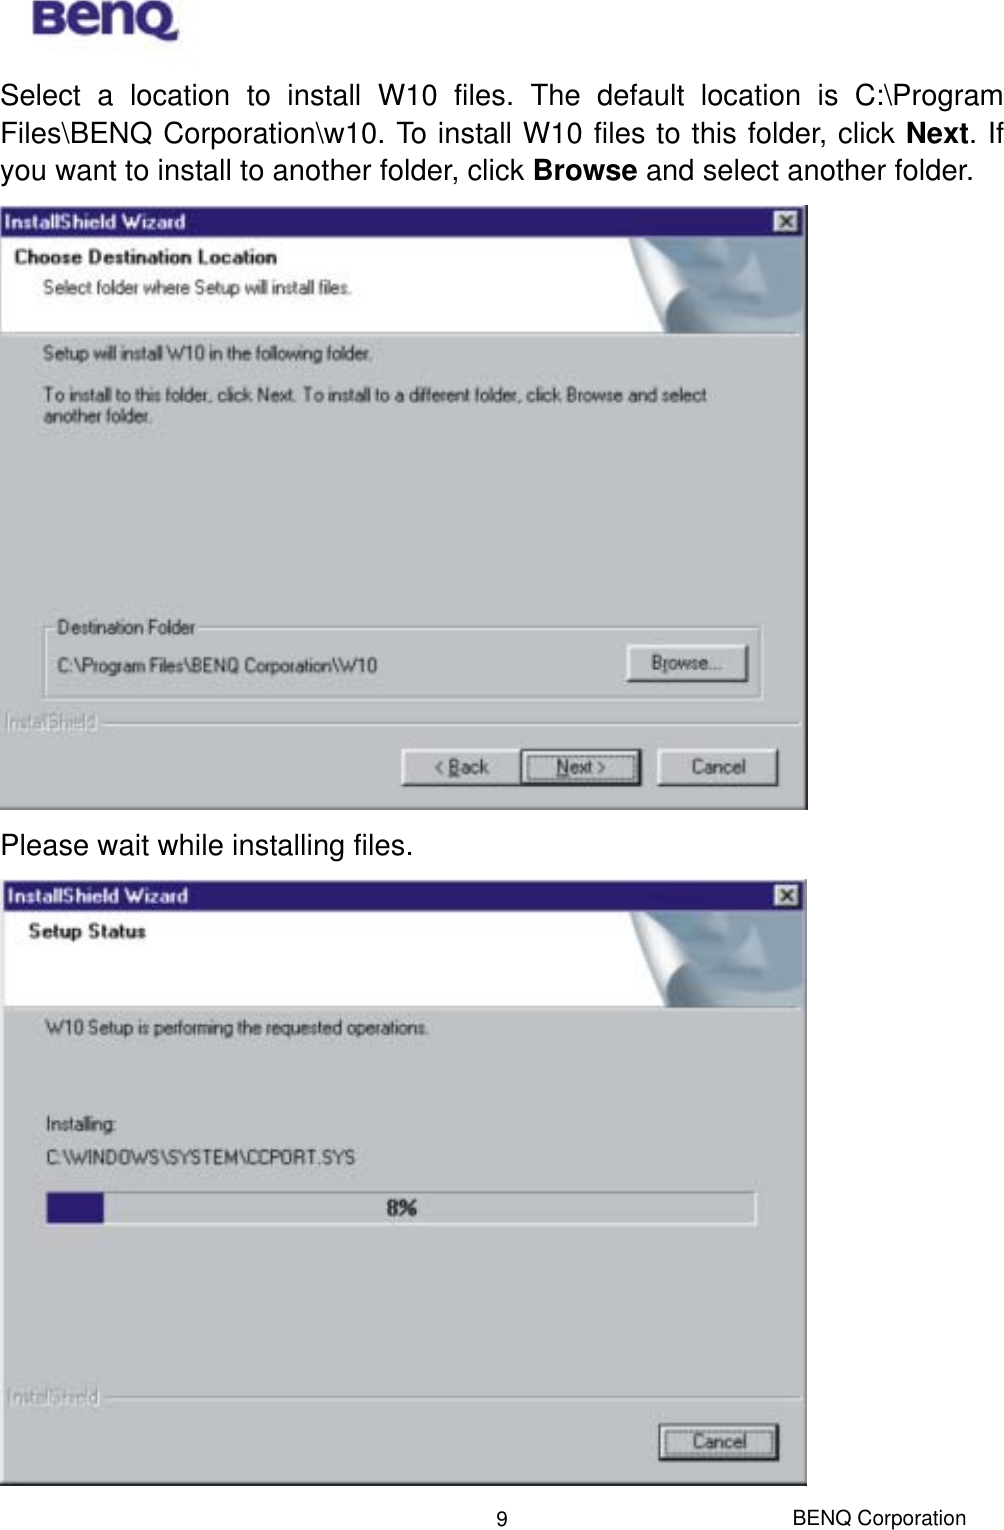  BENQ Corporation 9Select a location to install W10 files. The default location is C:\Program Files\BENQ Corporation\w10. To install W10 files to this folder, click Next. If you want to install to another folder, click Browse and select another folder.      Please wait while installing files.  